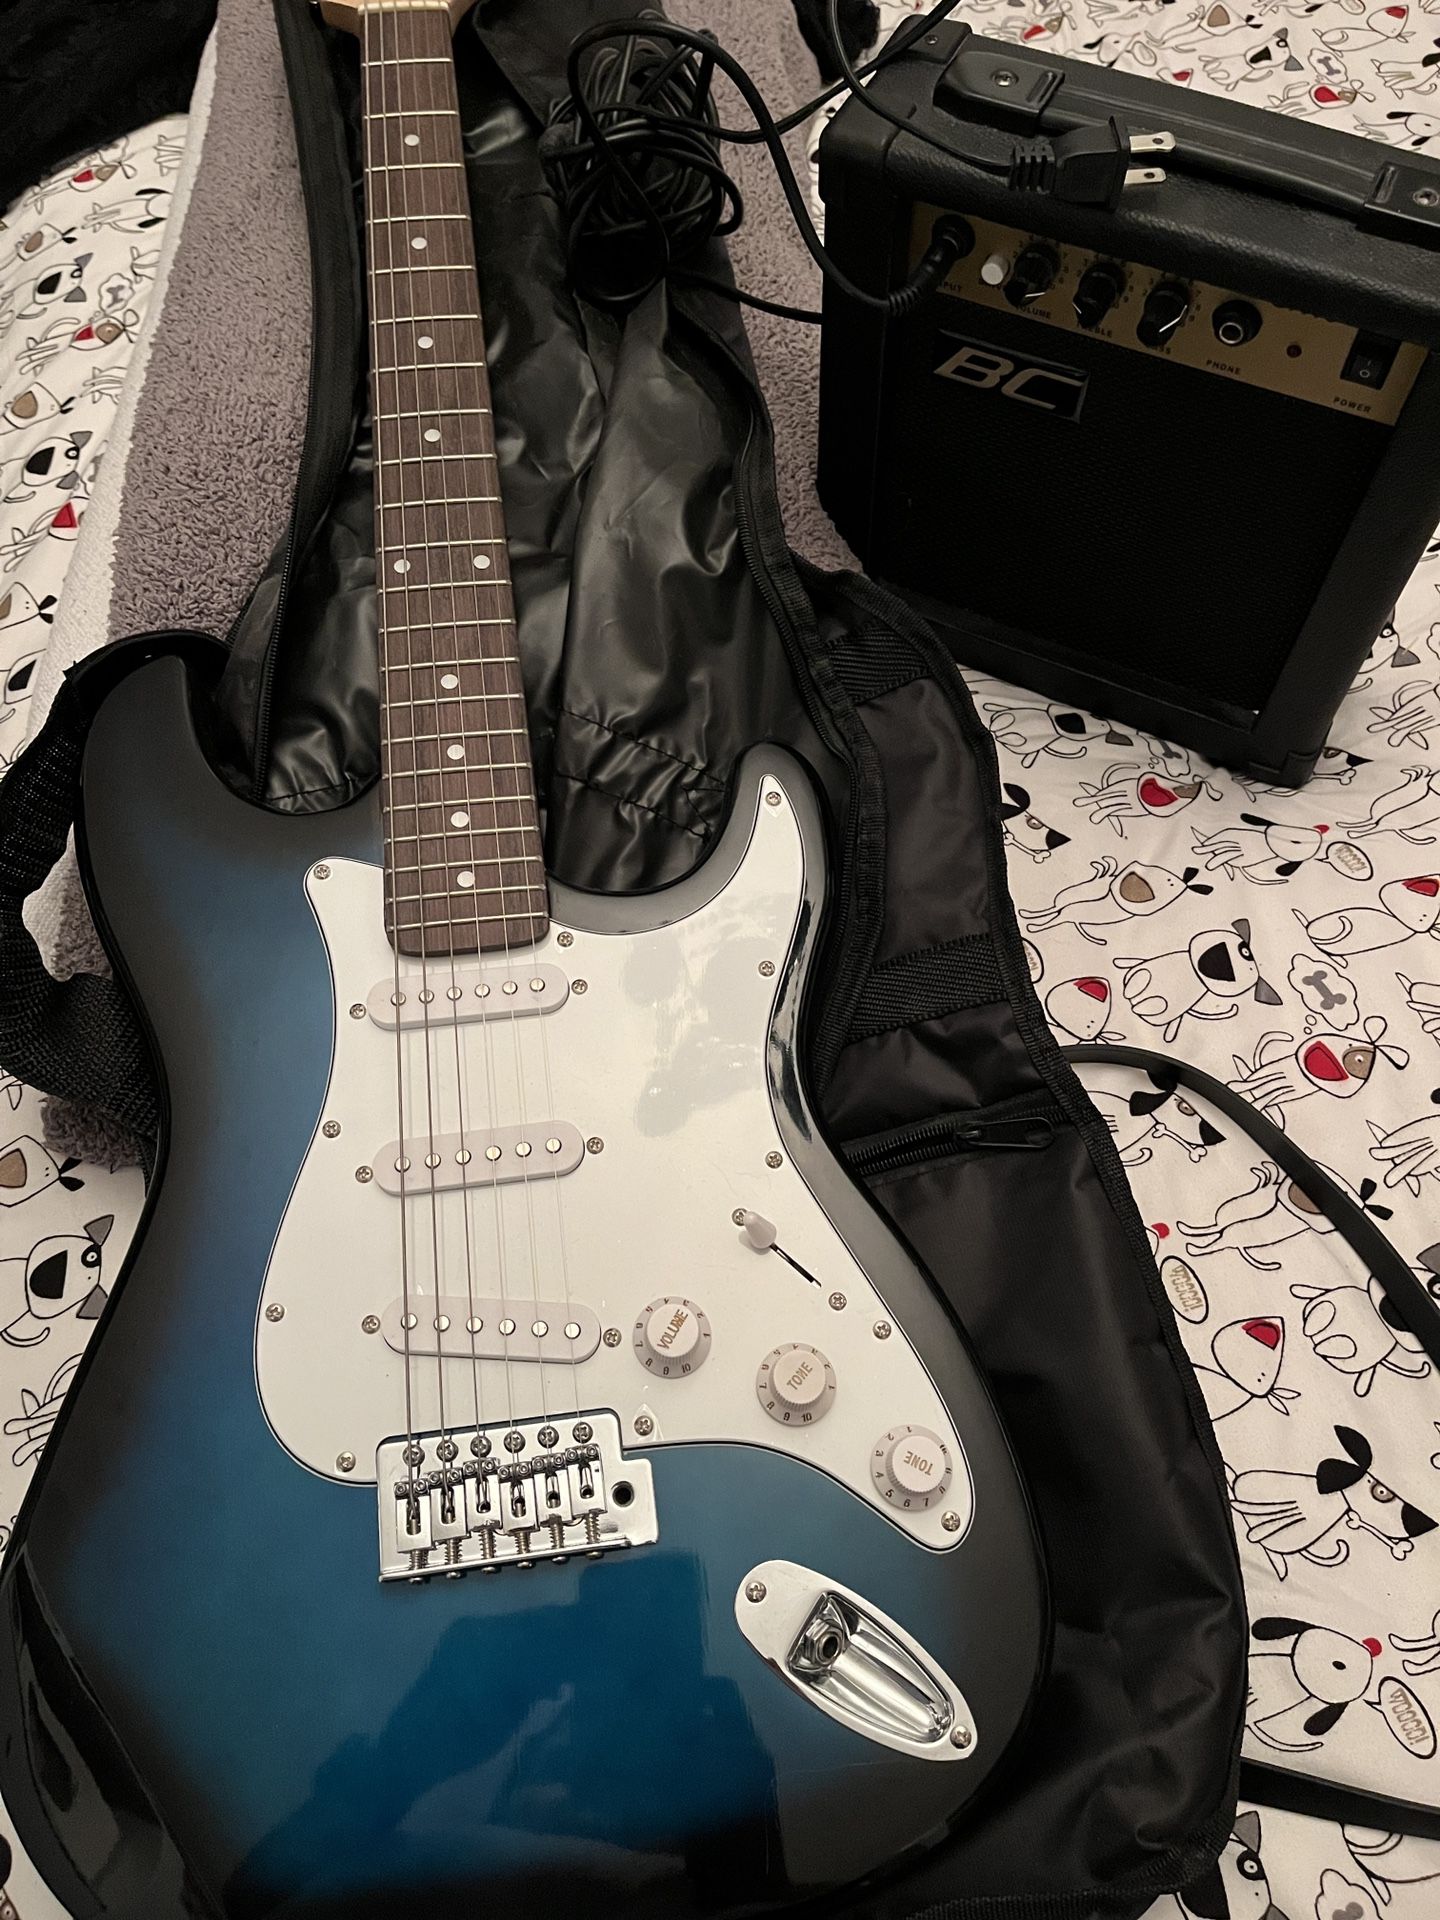 Used - Beginner Electric Guitar - Hollywood Blue No